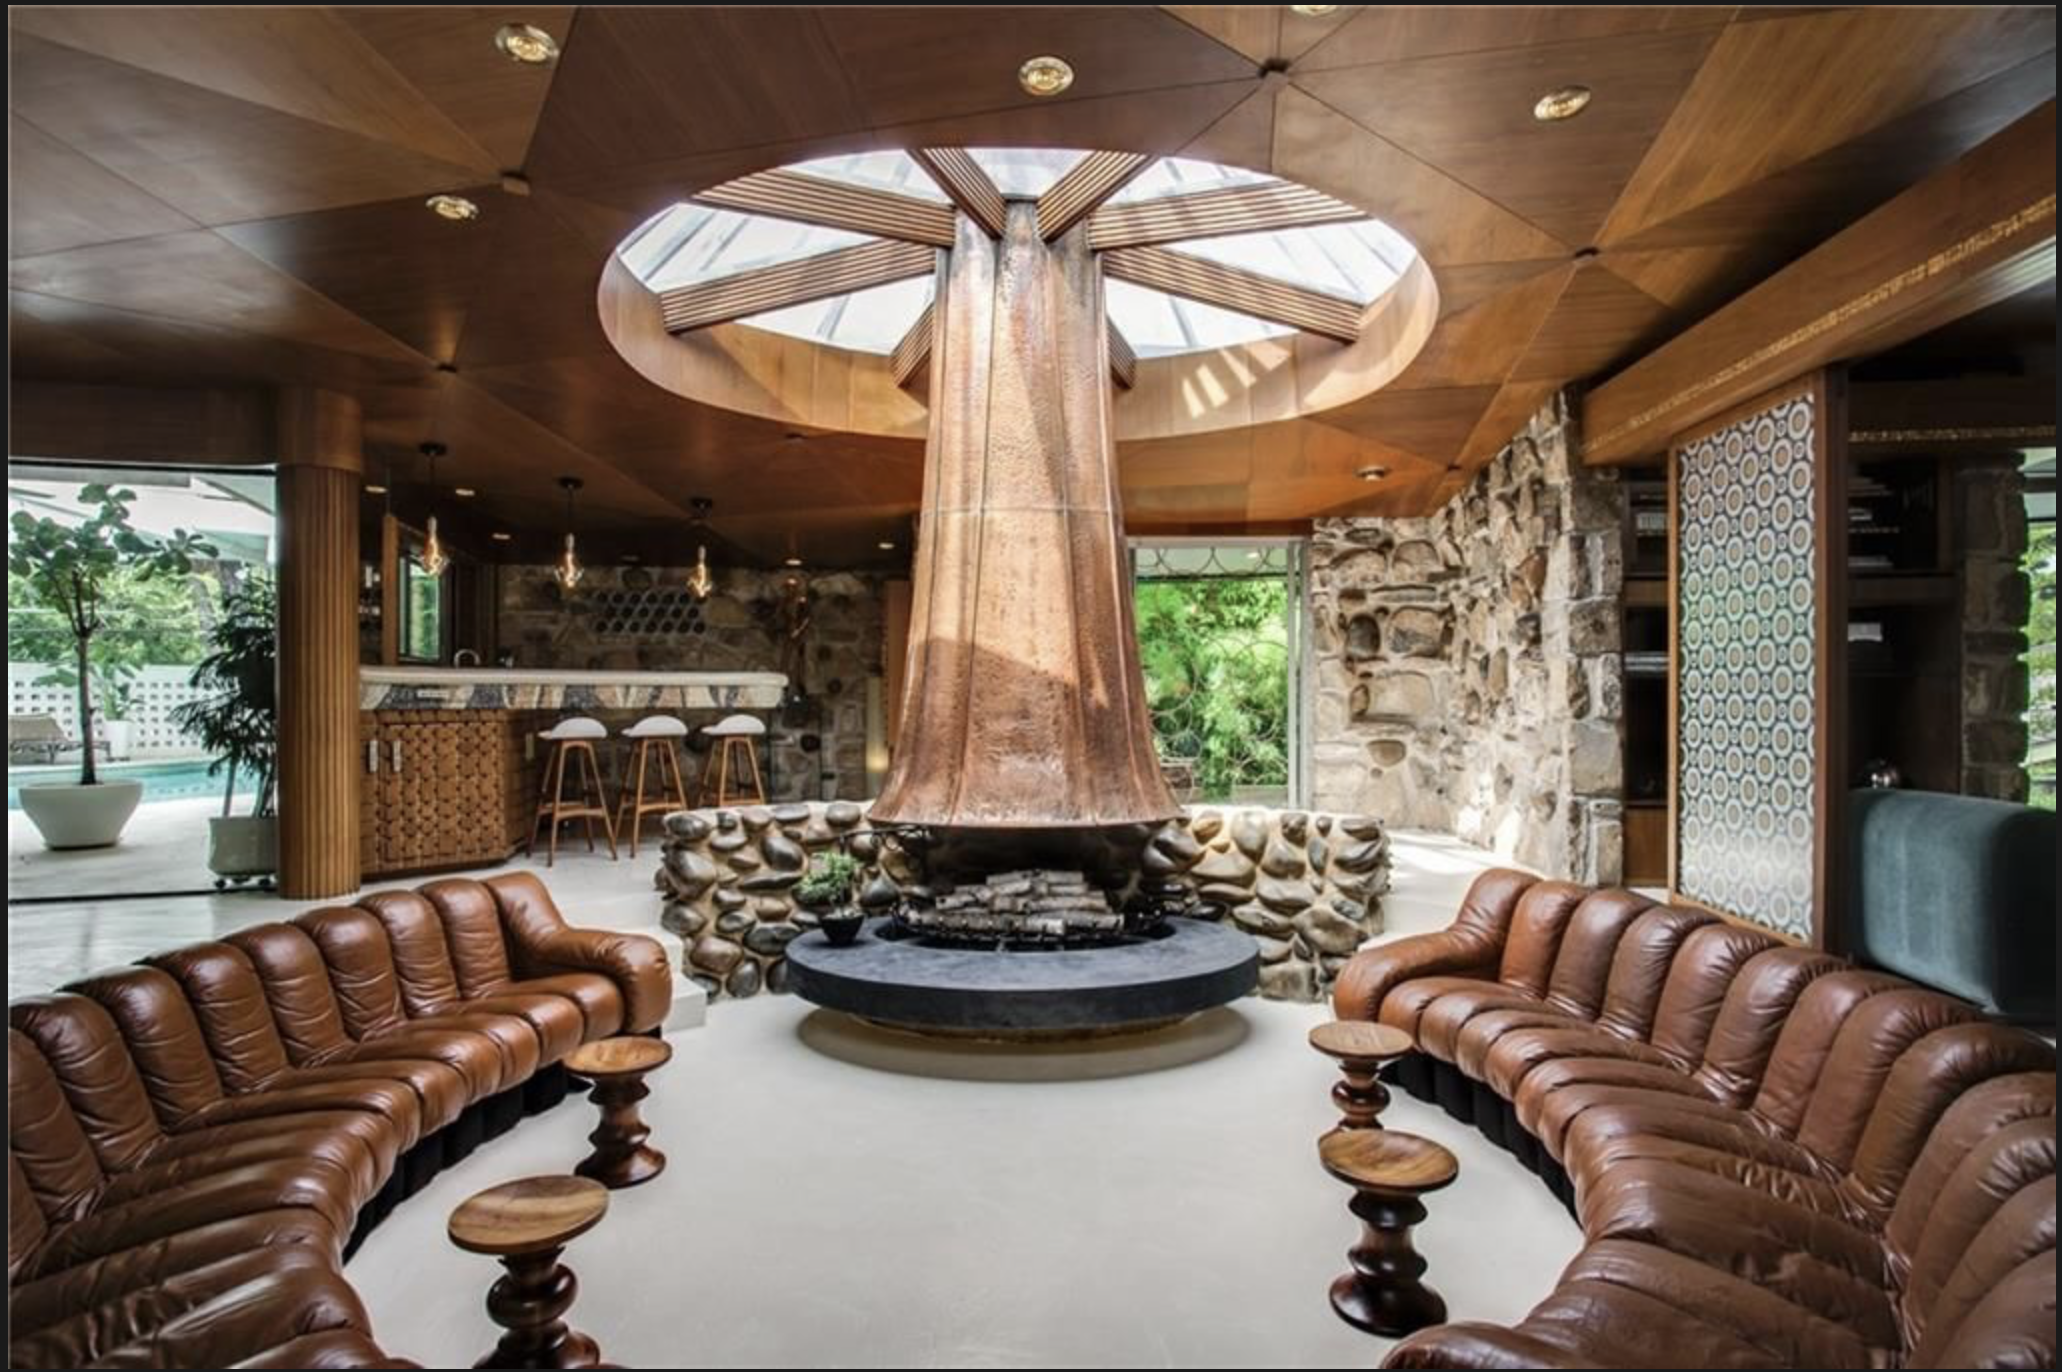 Conversation Pit @ The Round House in Texas